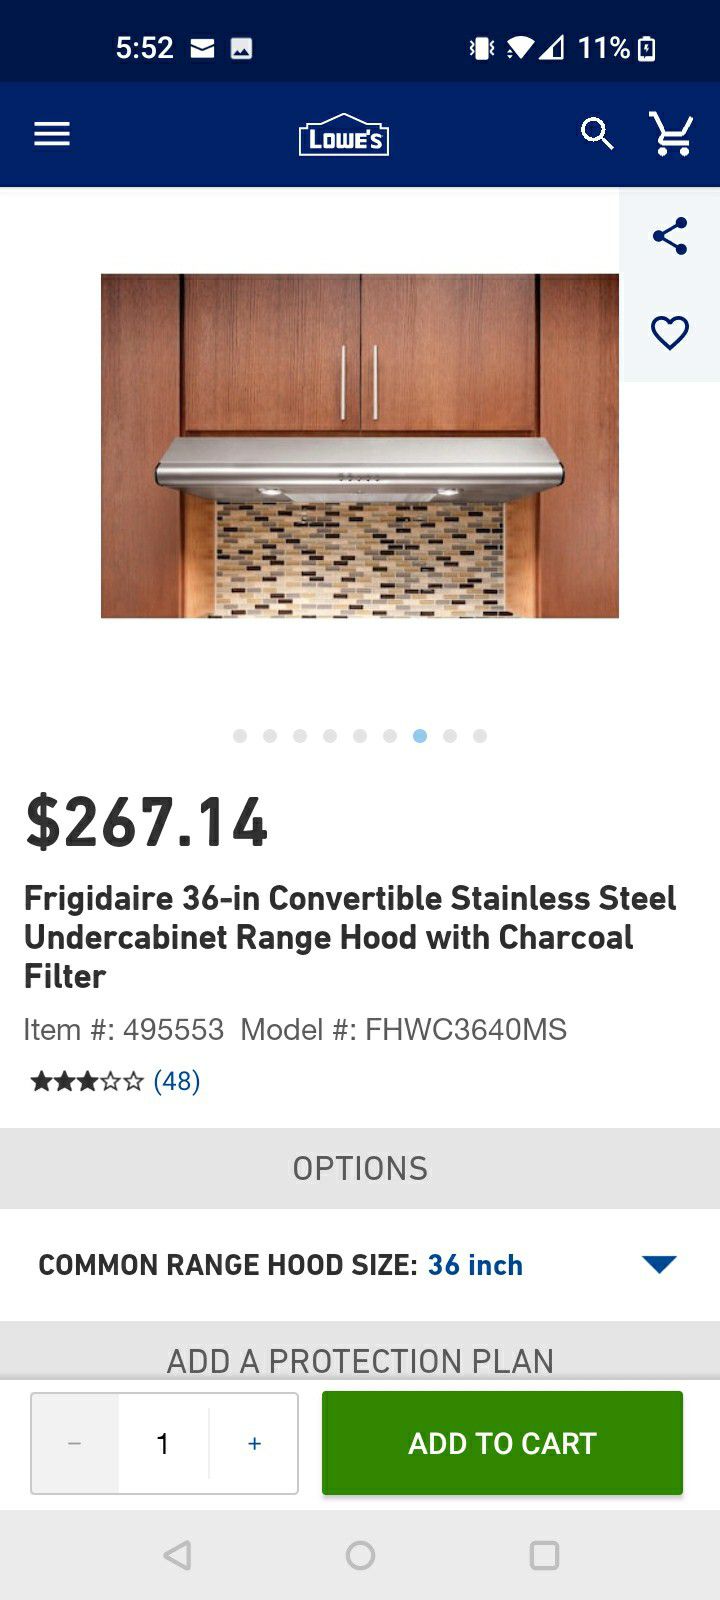 36" Stainless Steel Frigidaire Convertible Under Cabinet Range Hood Brand New Never Used Never Installed Works Excellent